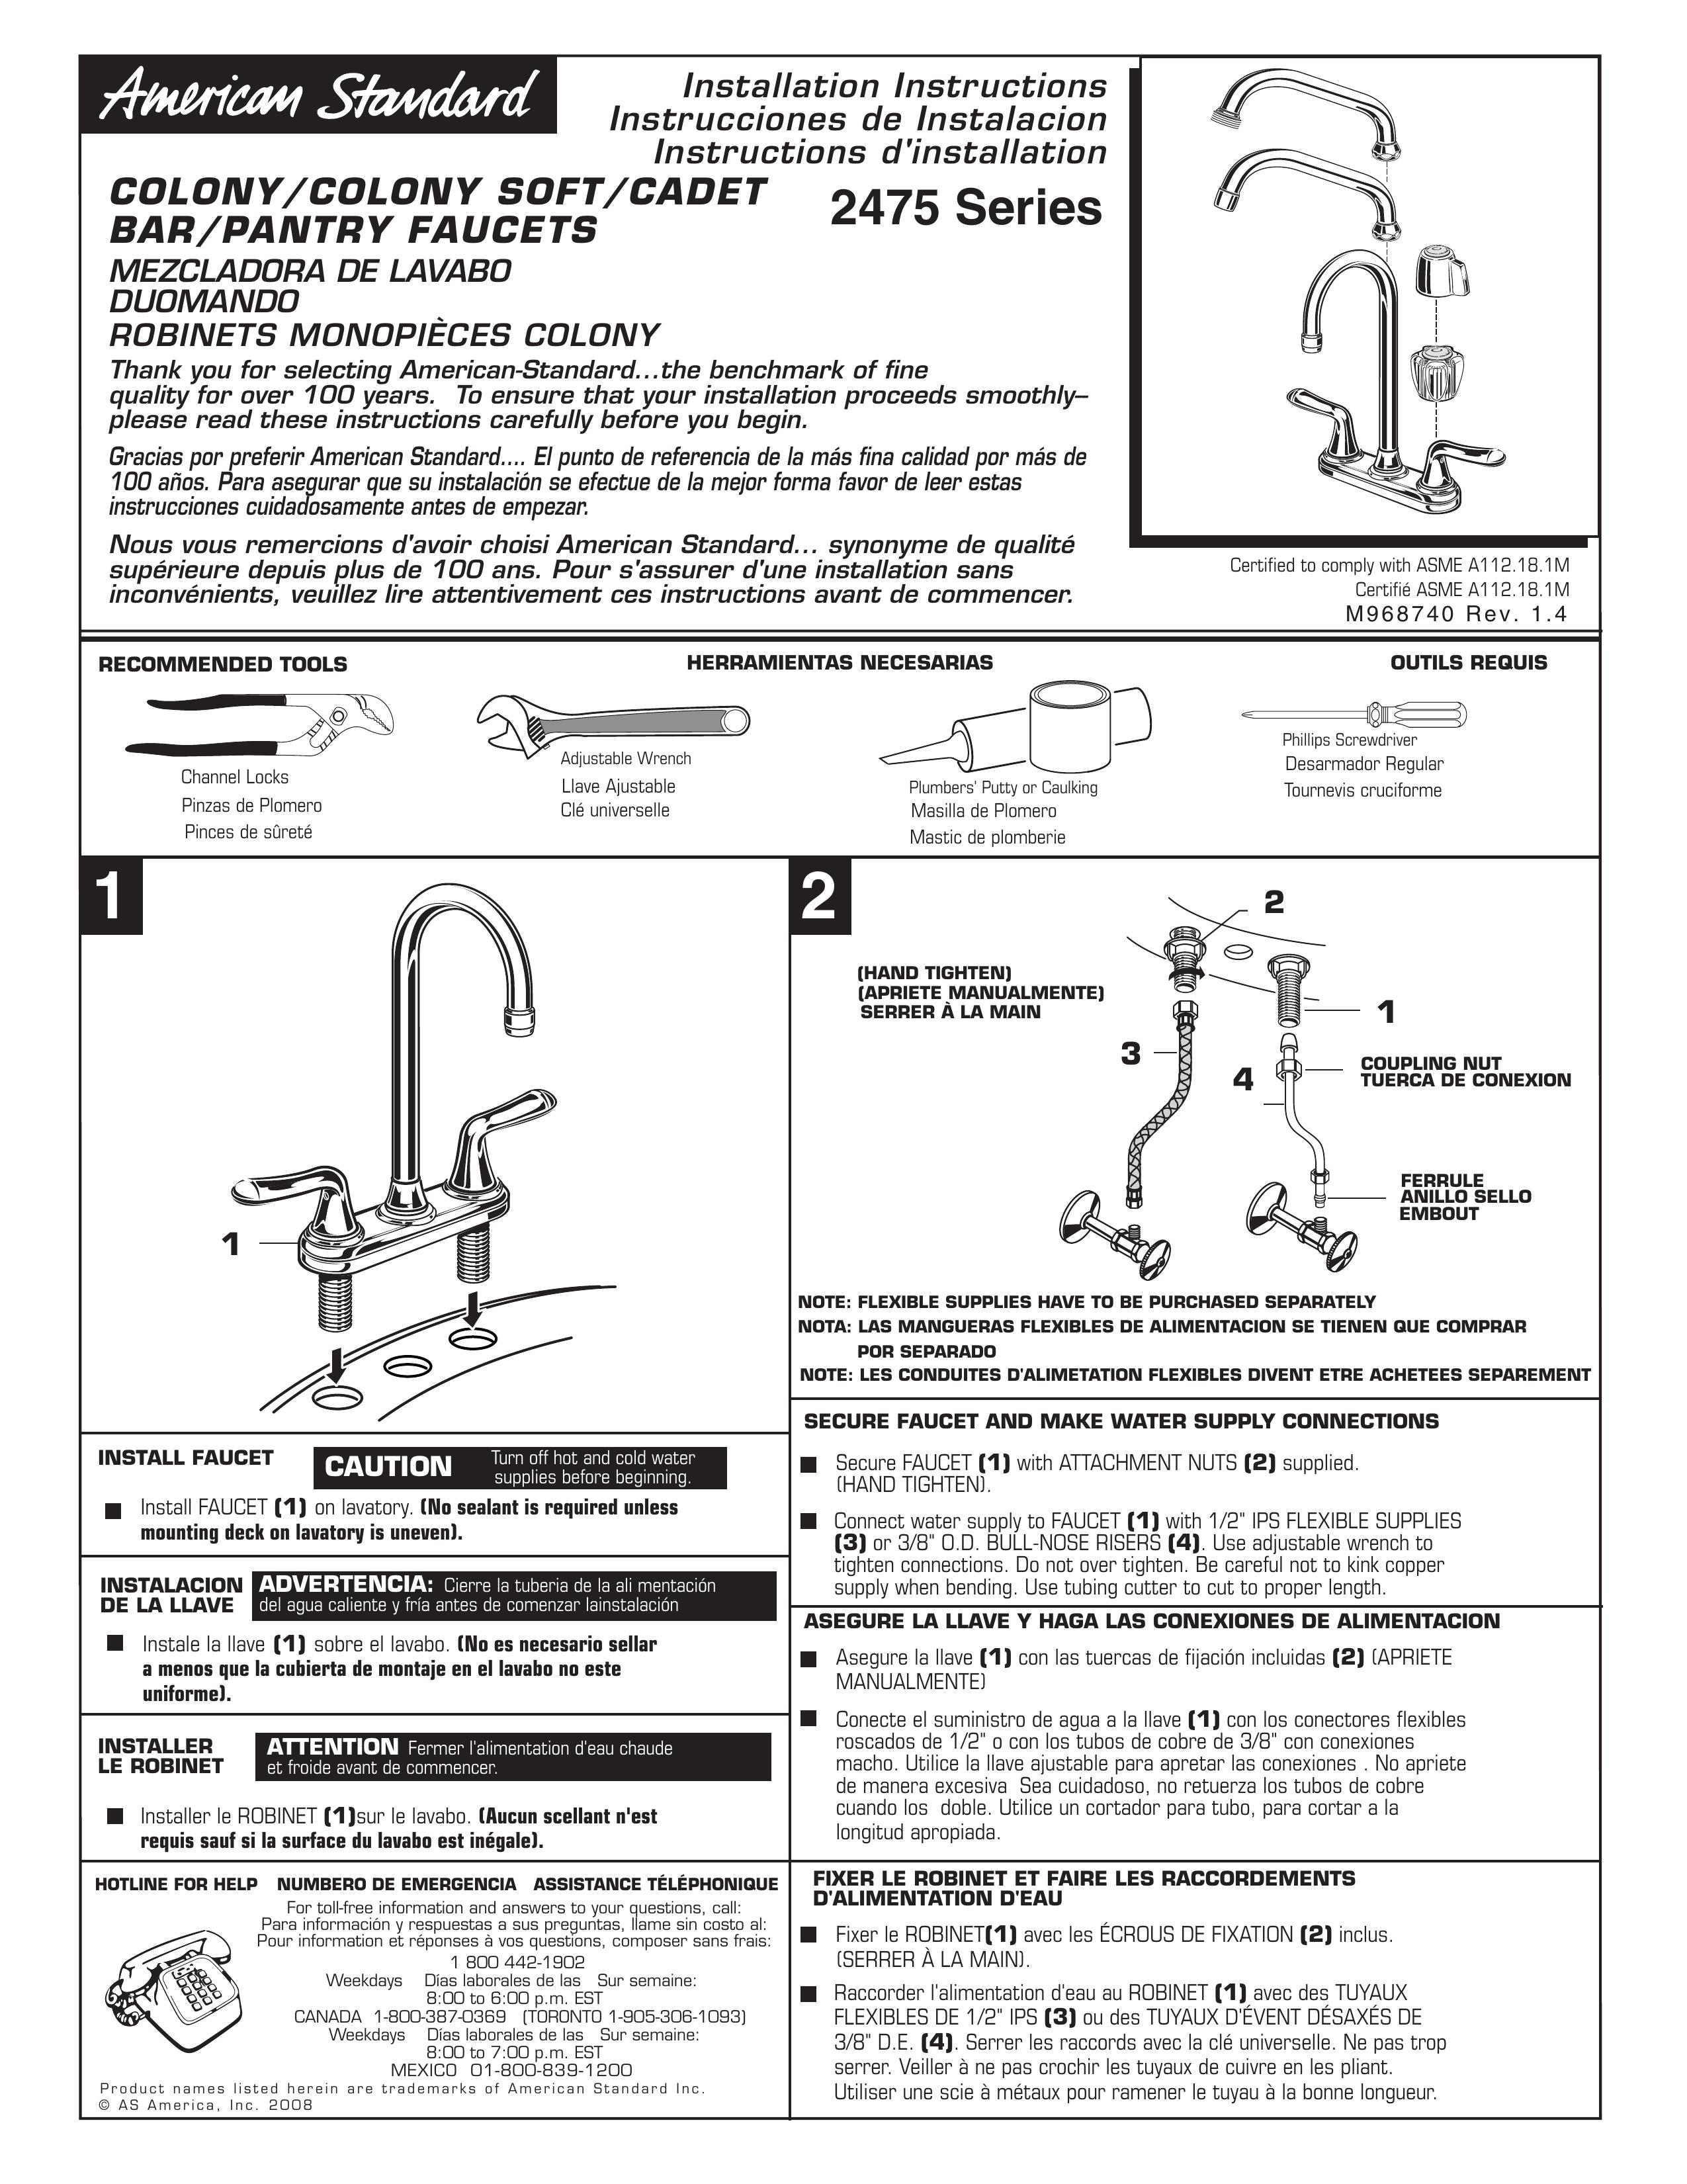 American Standard Colony/Colony Soft/Cadet Bar/Pantry Faucets Water Dispenser User Manual